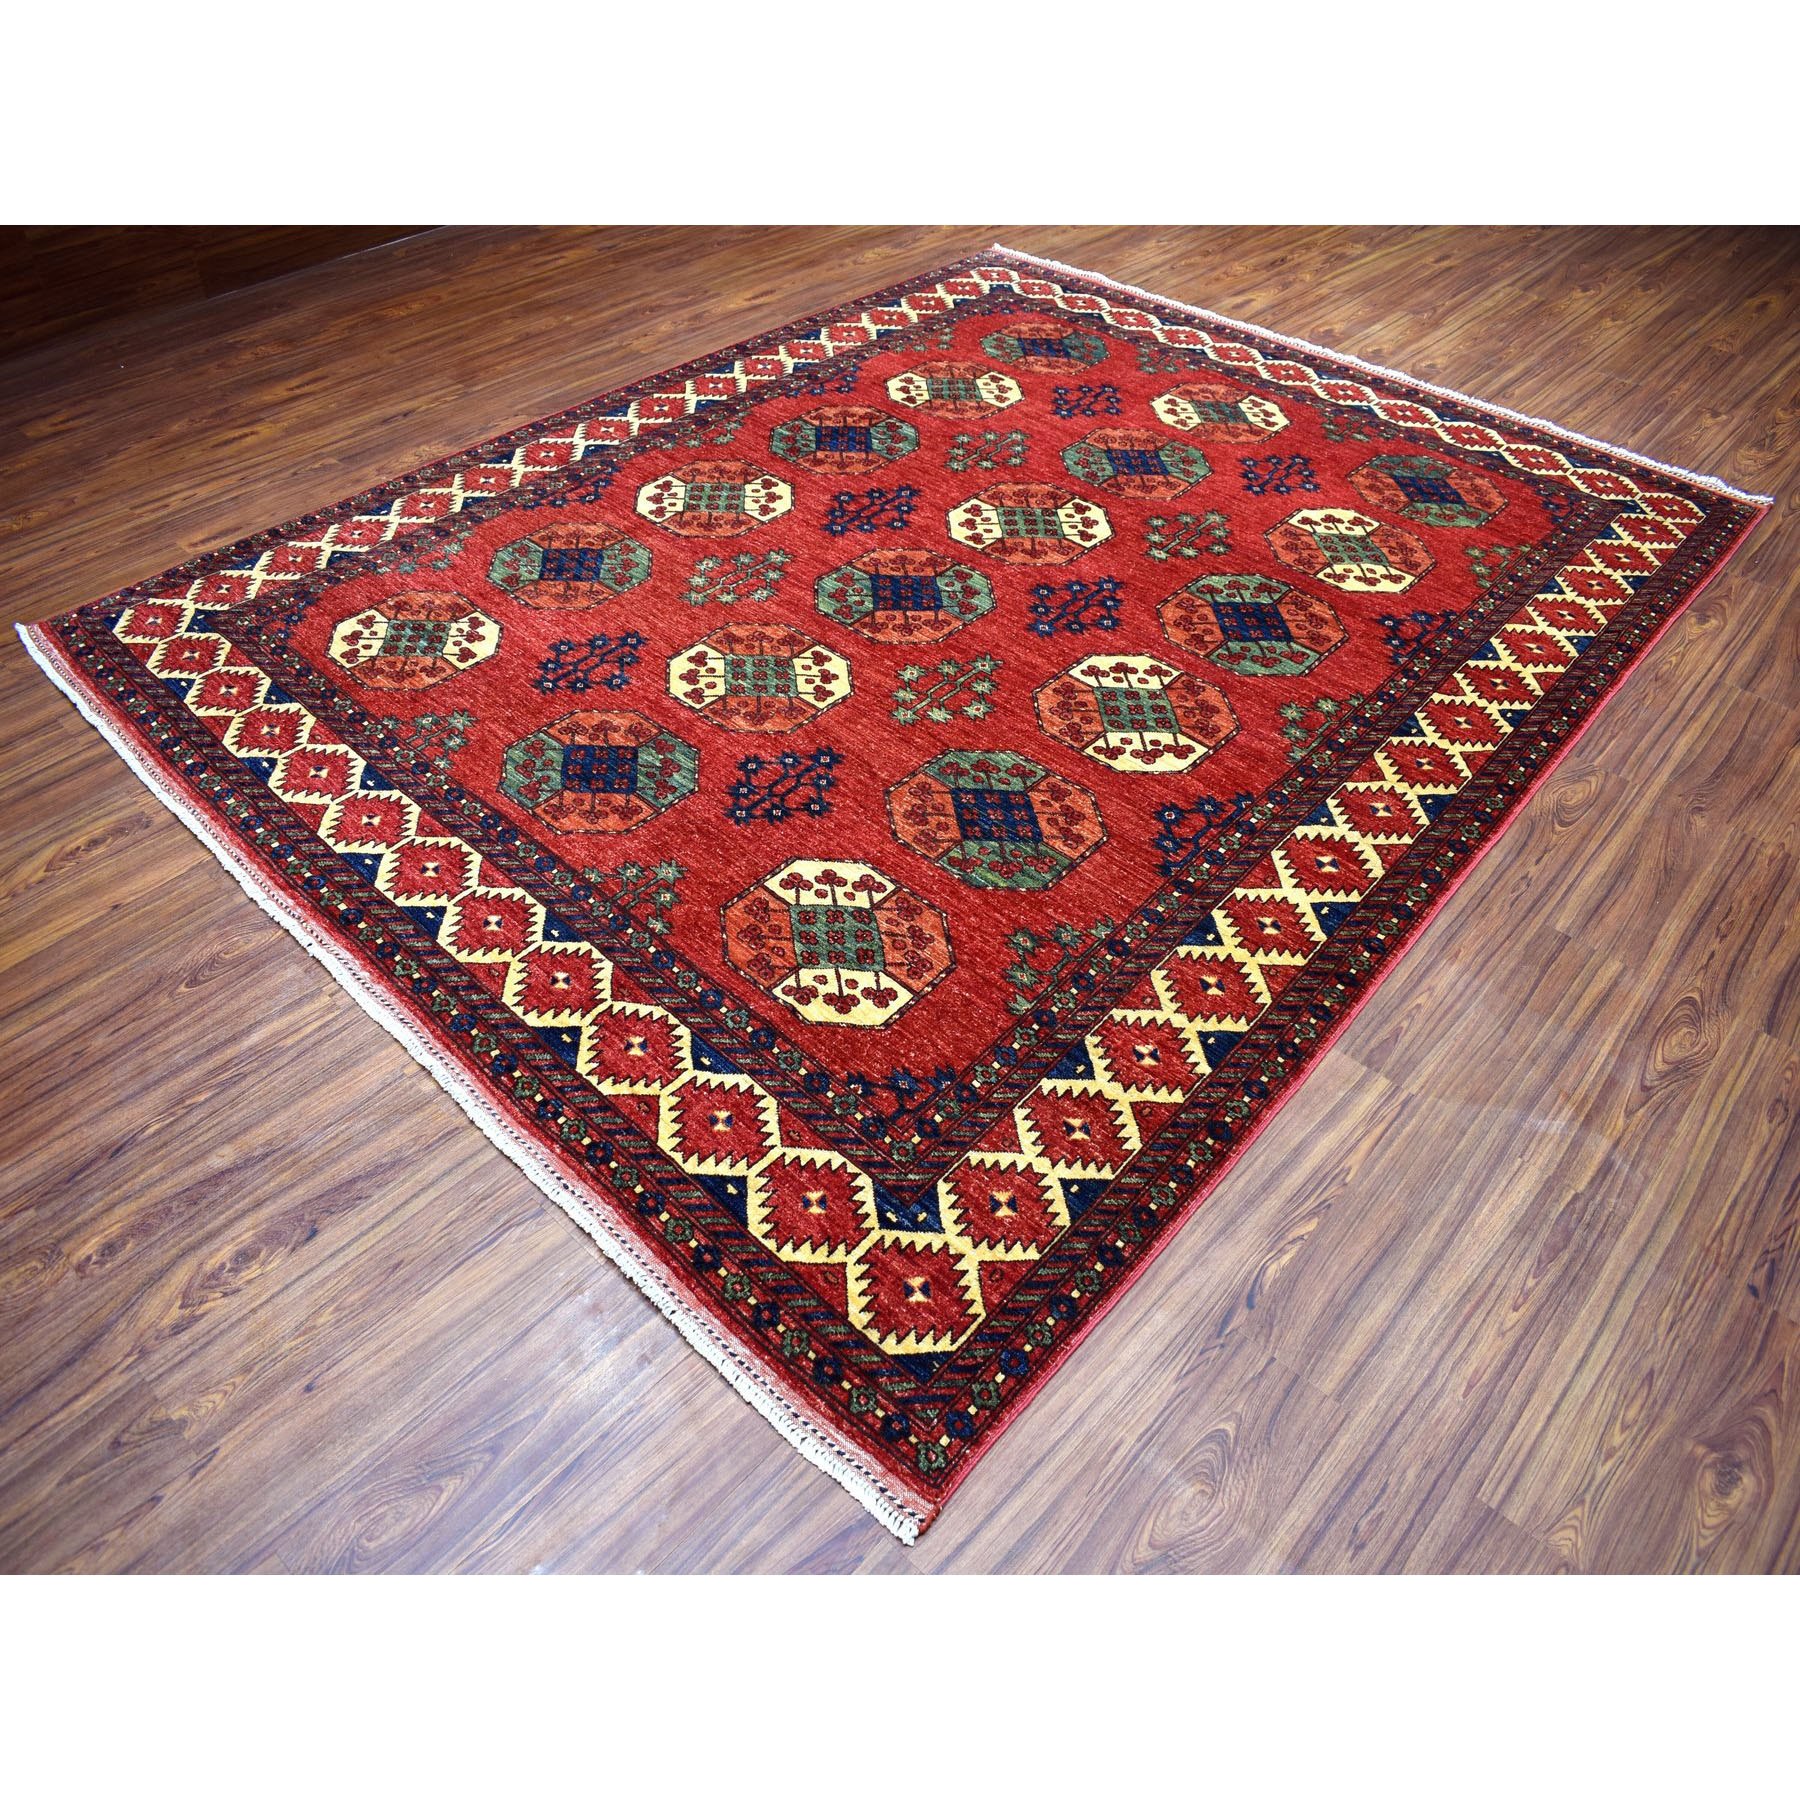 8-1 x10- Afghan Ersari With Elephant Feet Design Vegetable Dyes Pure Wool Hand Knotted Oriental Rug 